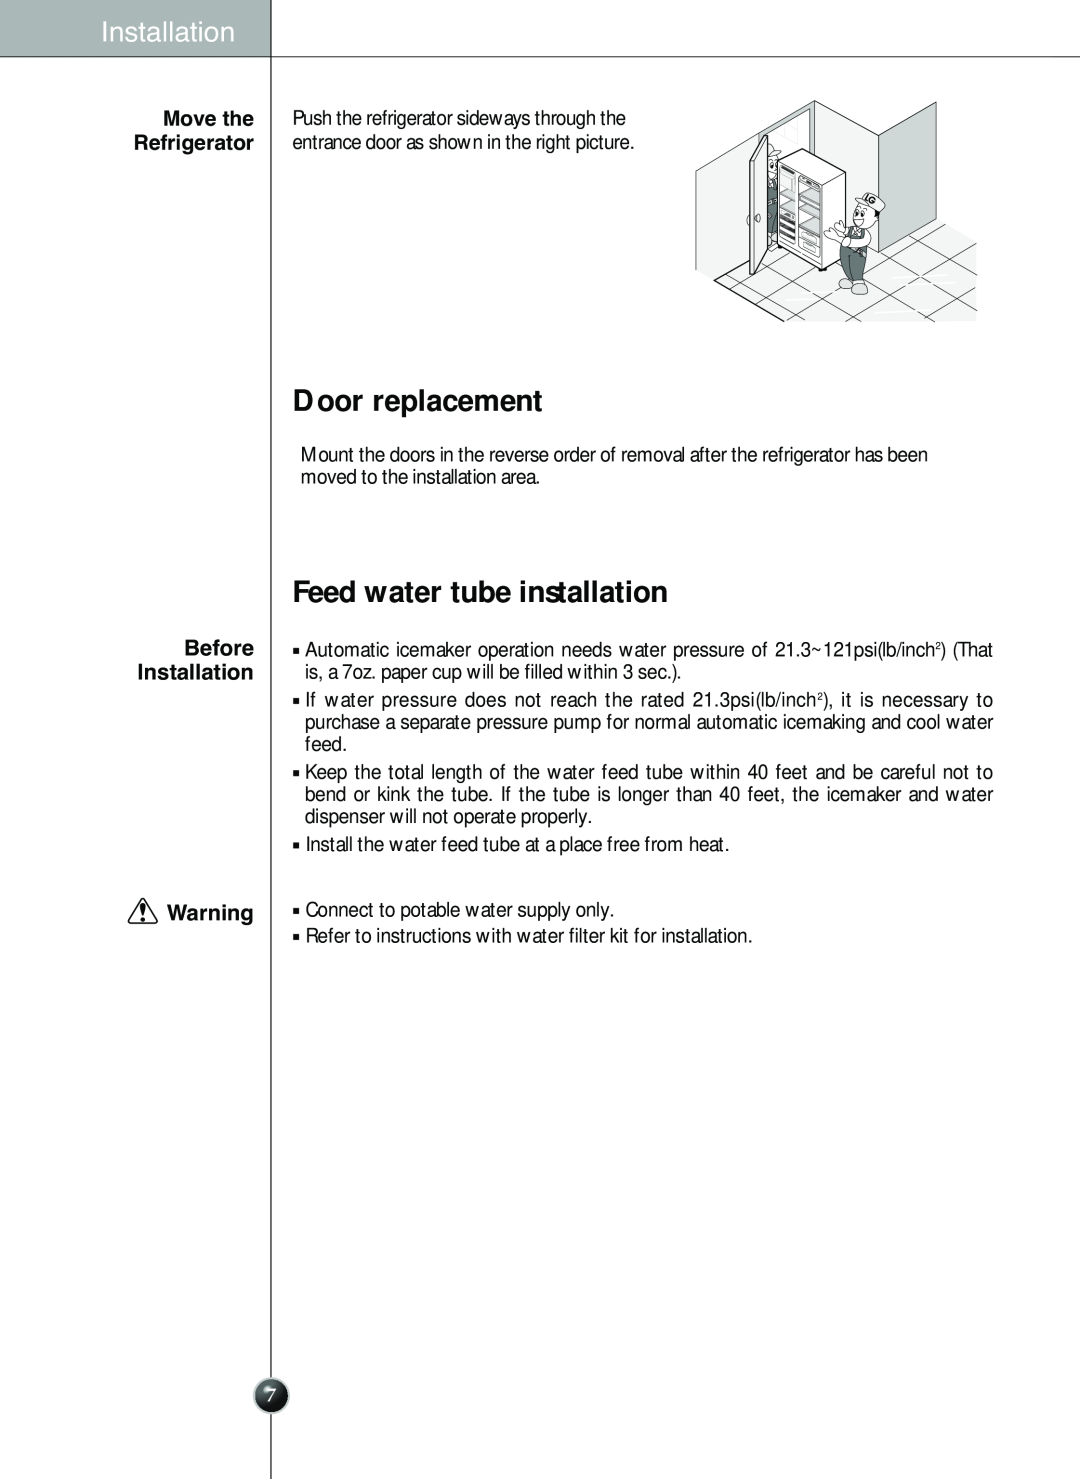 LG Electronics LSC 26905TT manual Door replacement, Feed water tube installation, Before Installation 